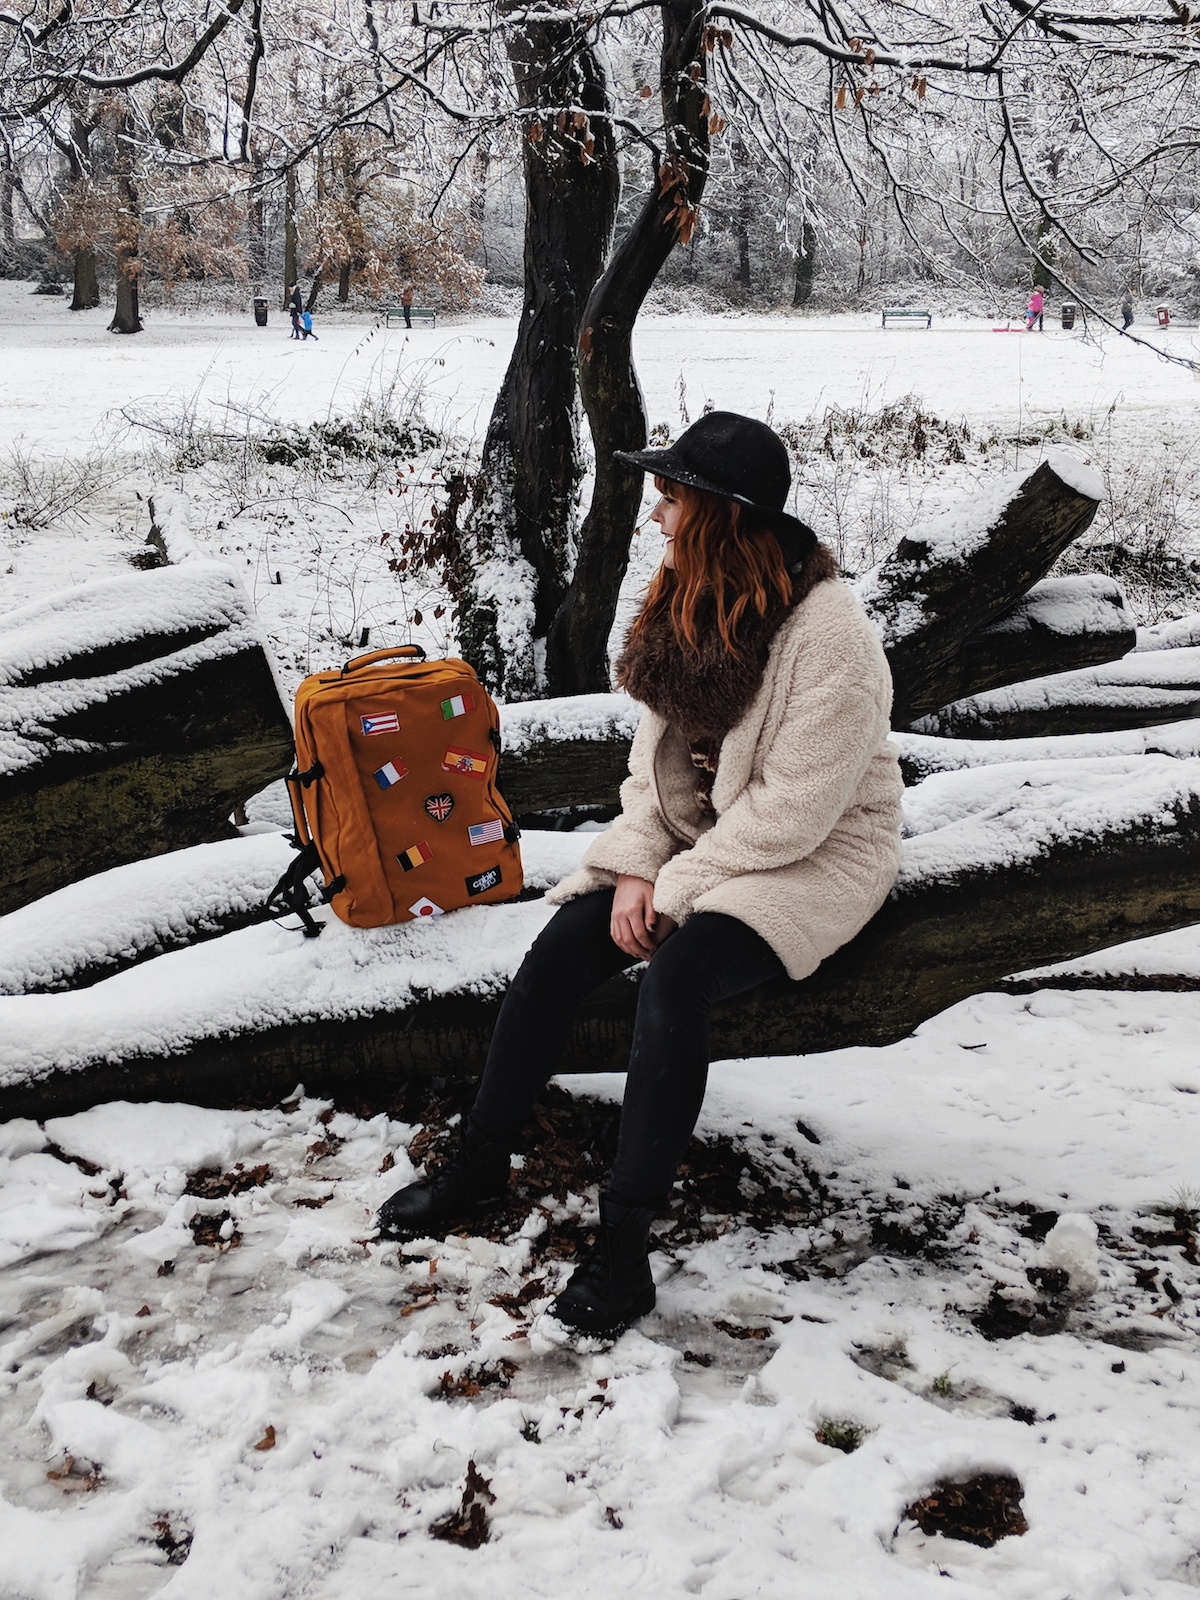 Travel blogger, Leigh Travers, sits amongst a snowy forest scene with her Cabin Zero rucksack